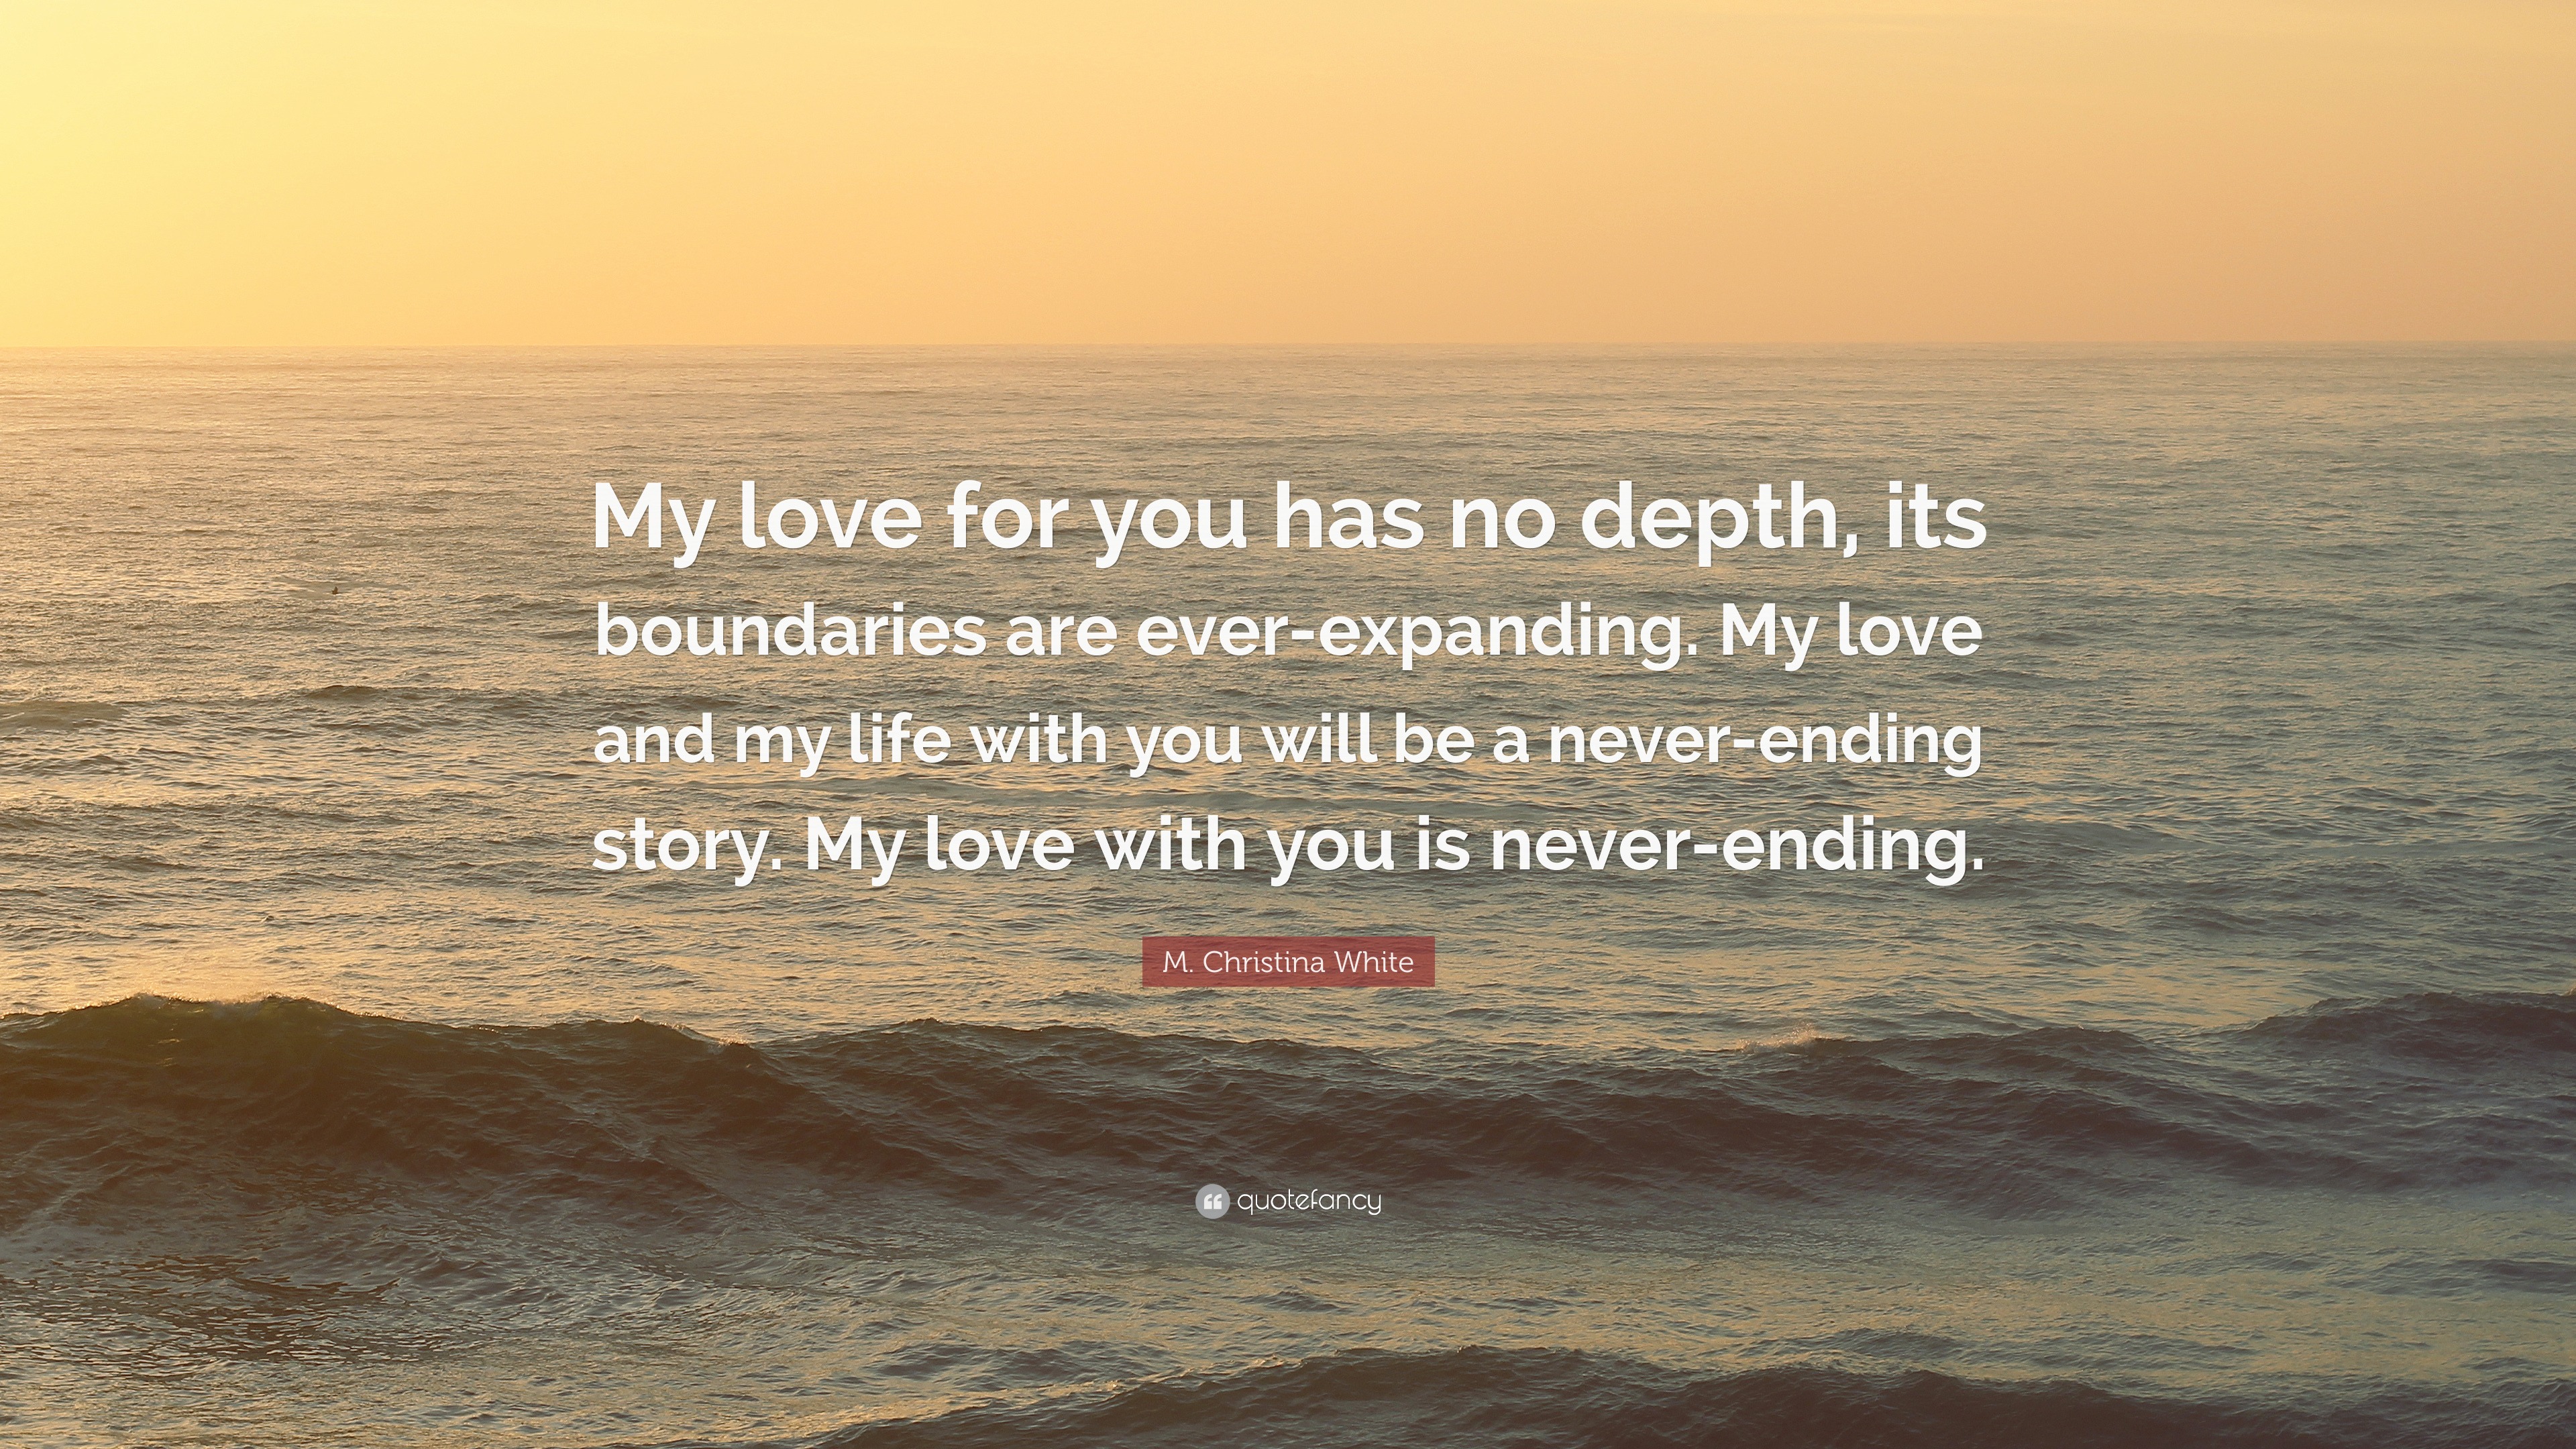 M Christina White Quote “My love for you has no depth its